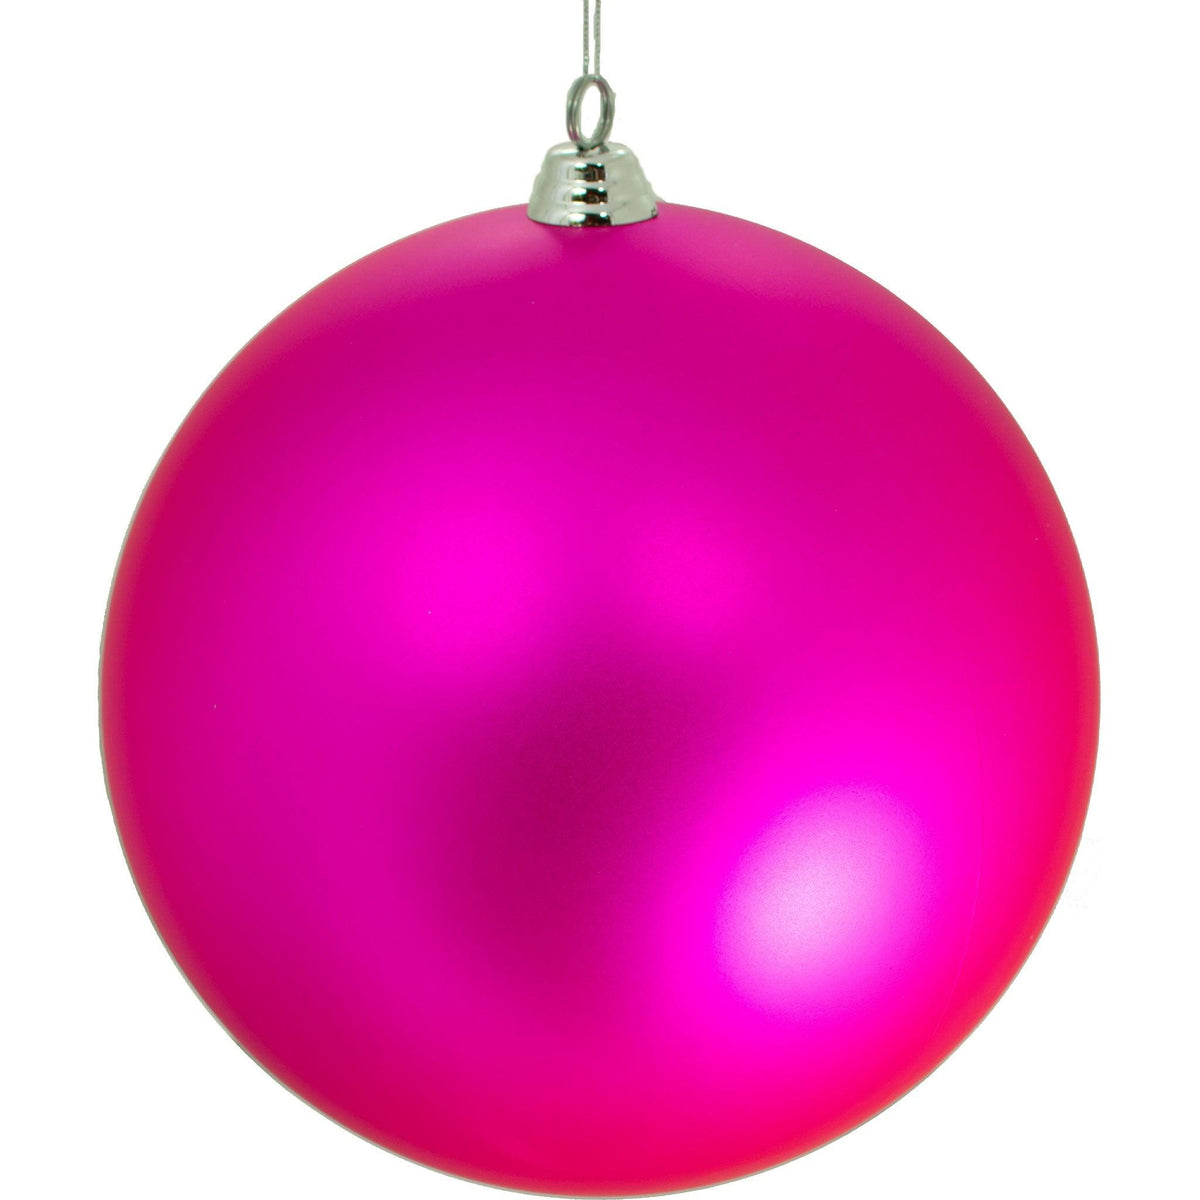 Matte Pink color plastic ball ornaments sold in extra large sizes with a silver cap and hanging string included